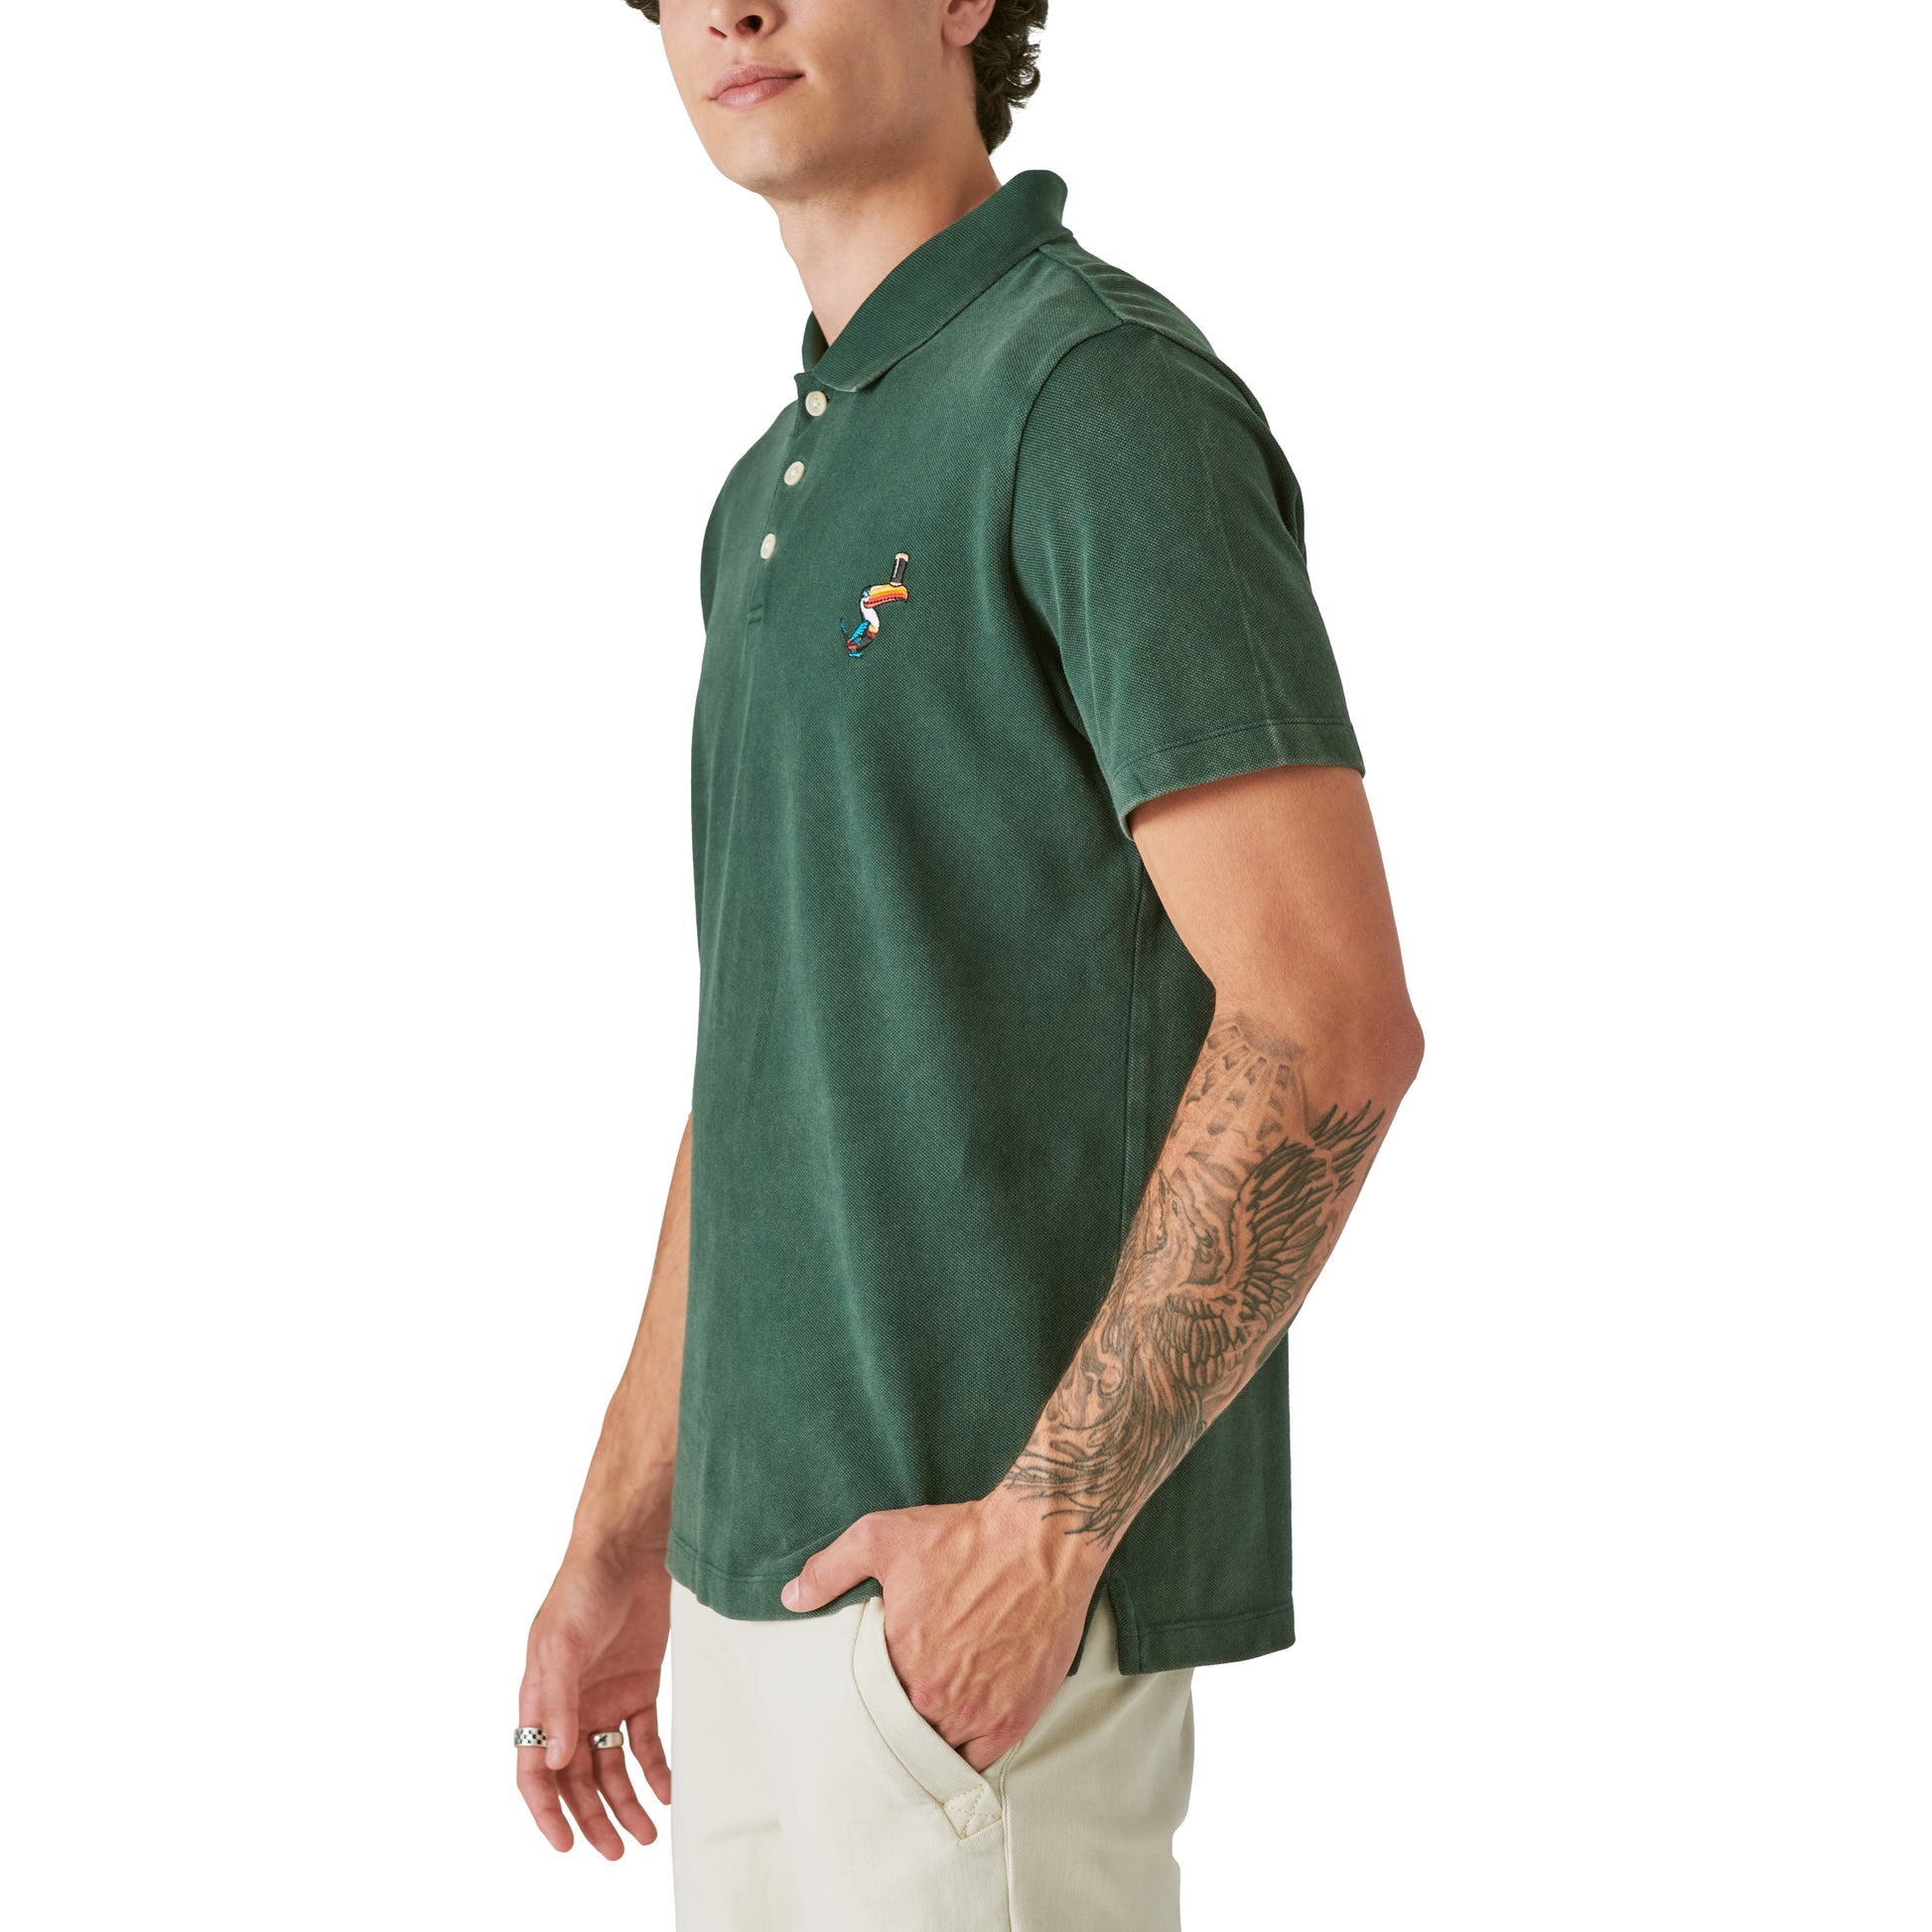 A man wearing a Guinness Polo - Pine Grove shirt in the color green and white pants from Guinness Webstore US.